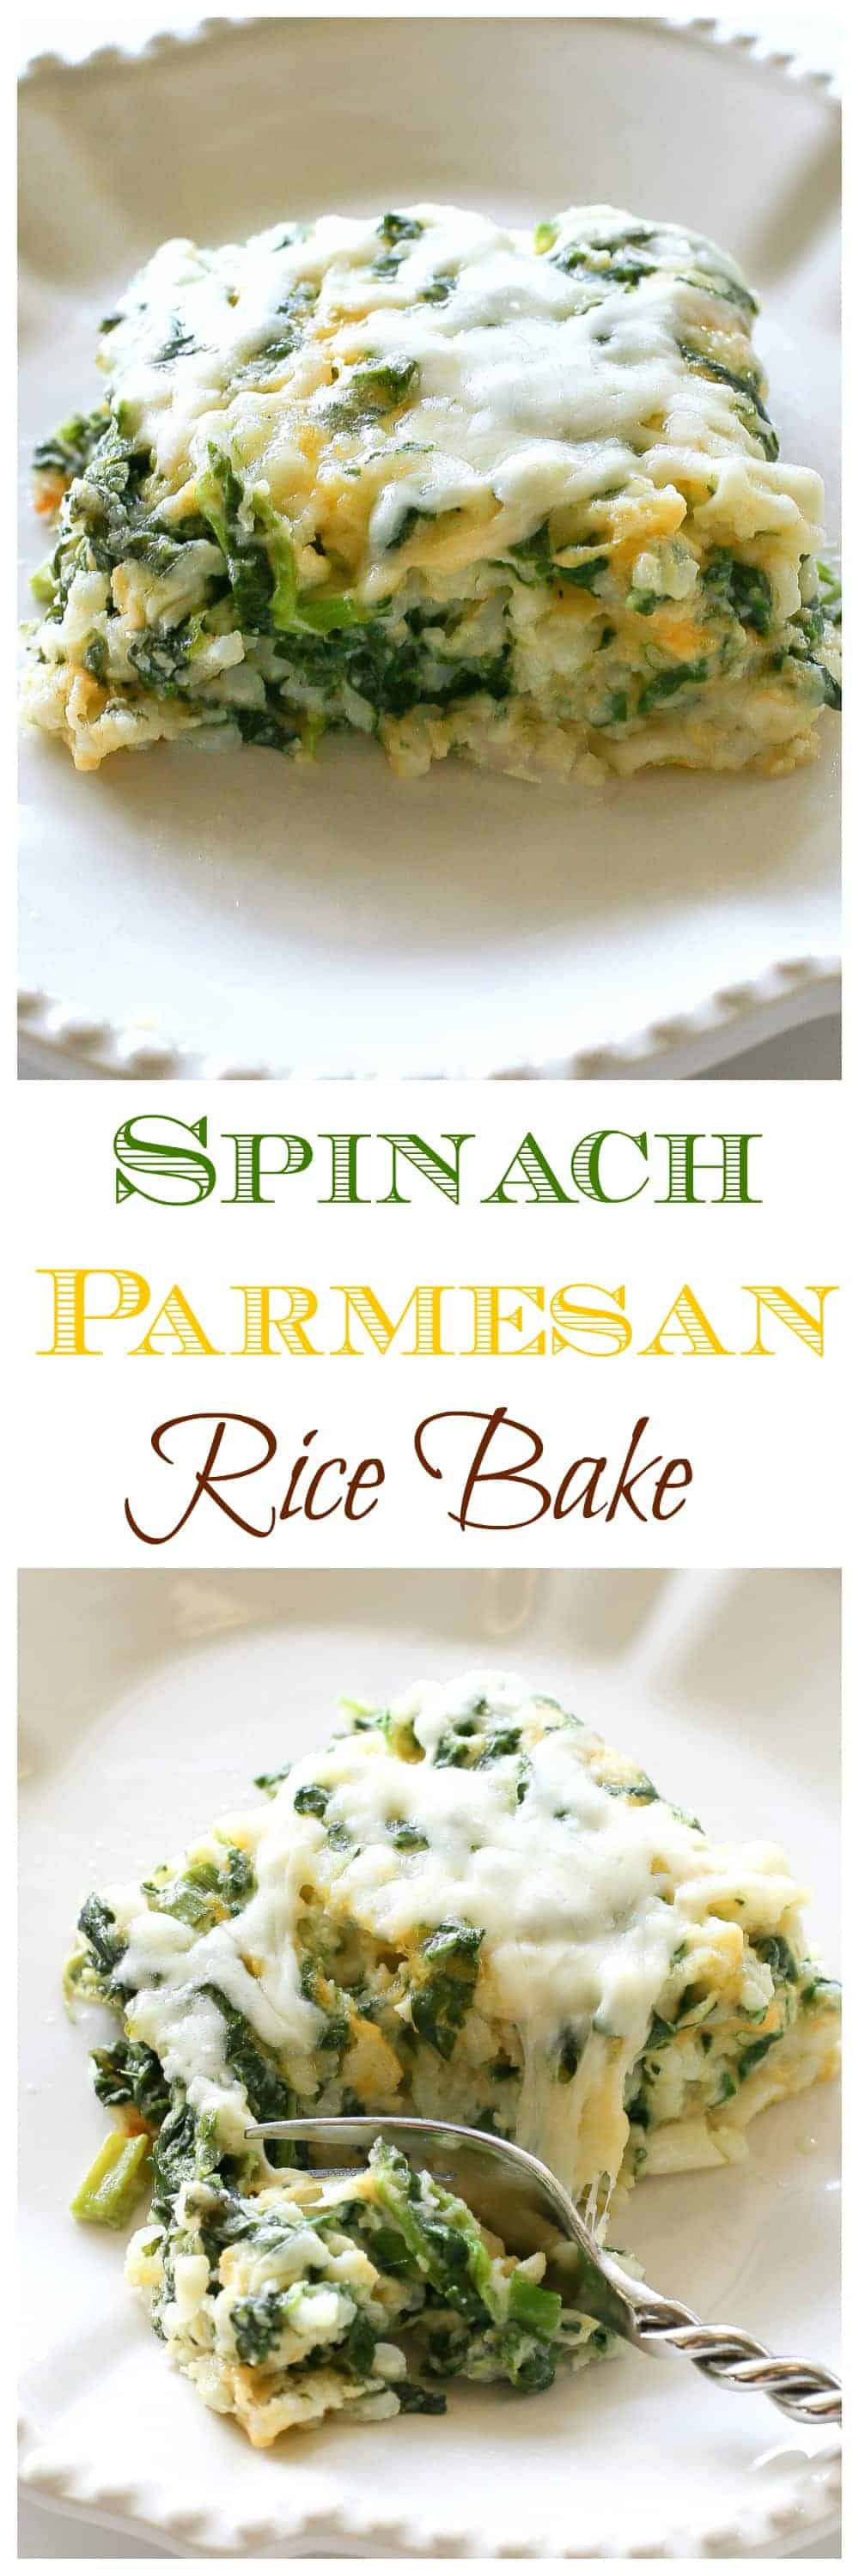 Spinach Parmesan Rice Bake - The Girl Who Ate Everything